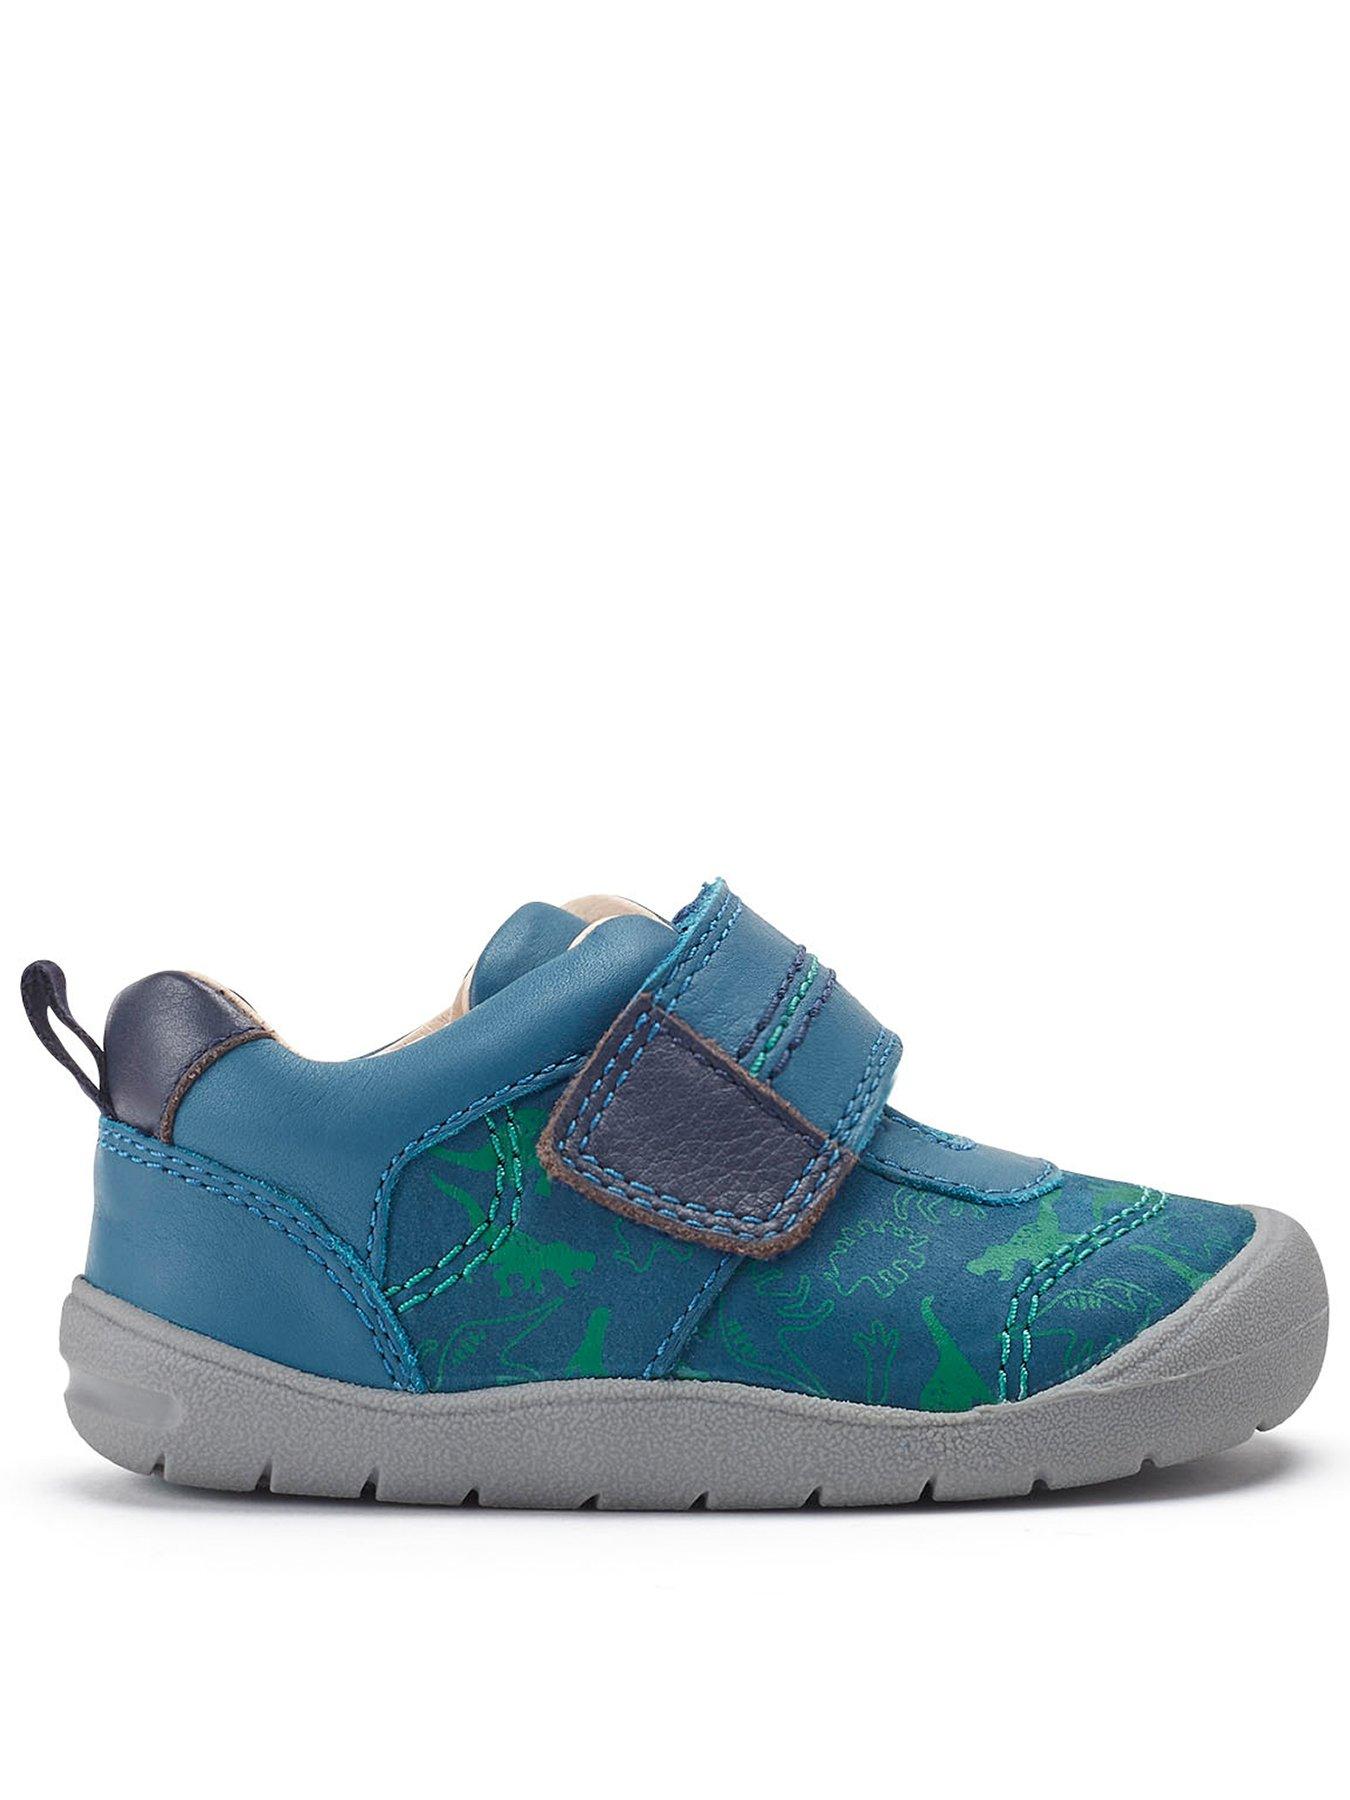 Start-rite Super Soft Leo Boy's Shoes Navy/Teal Leather 50% OFF RRP 